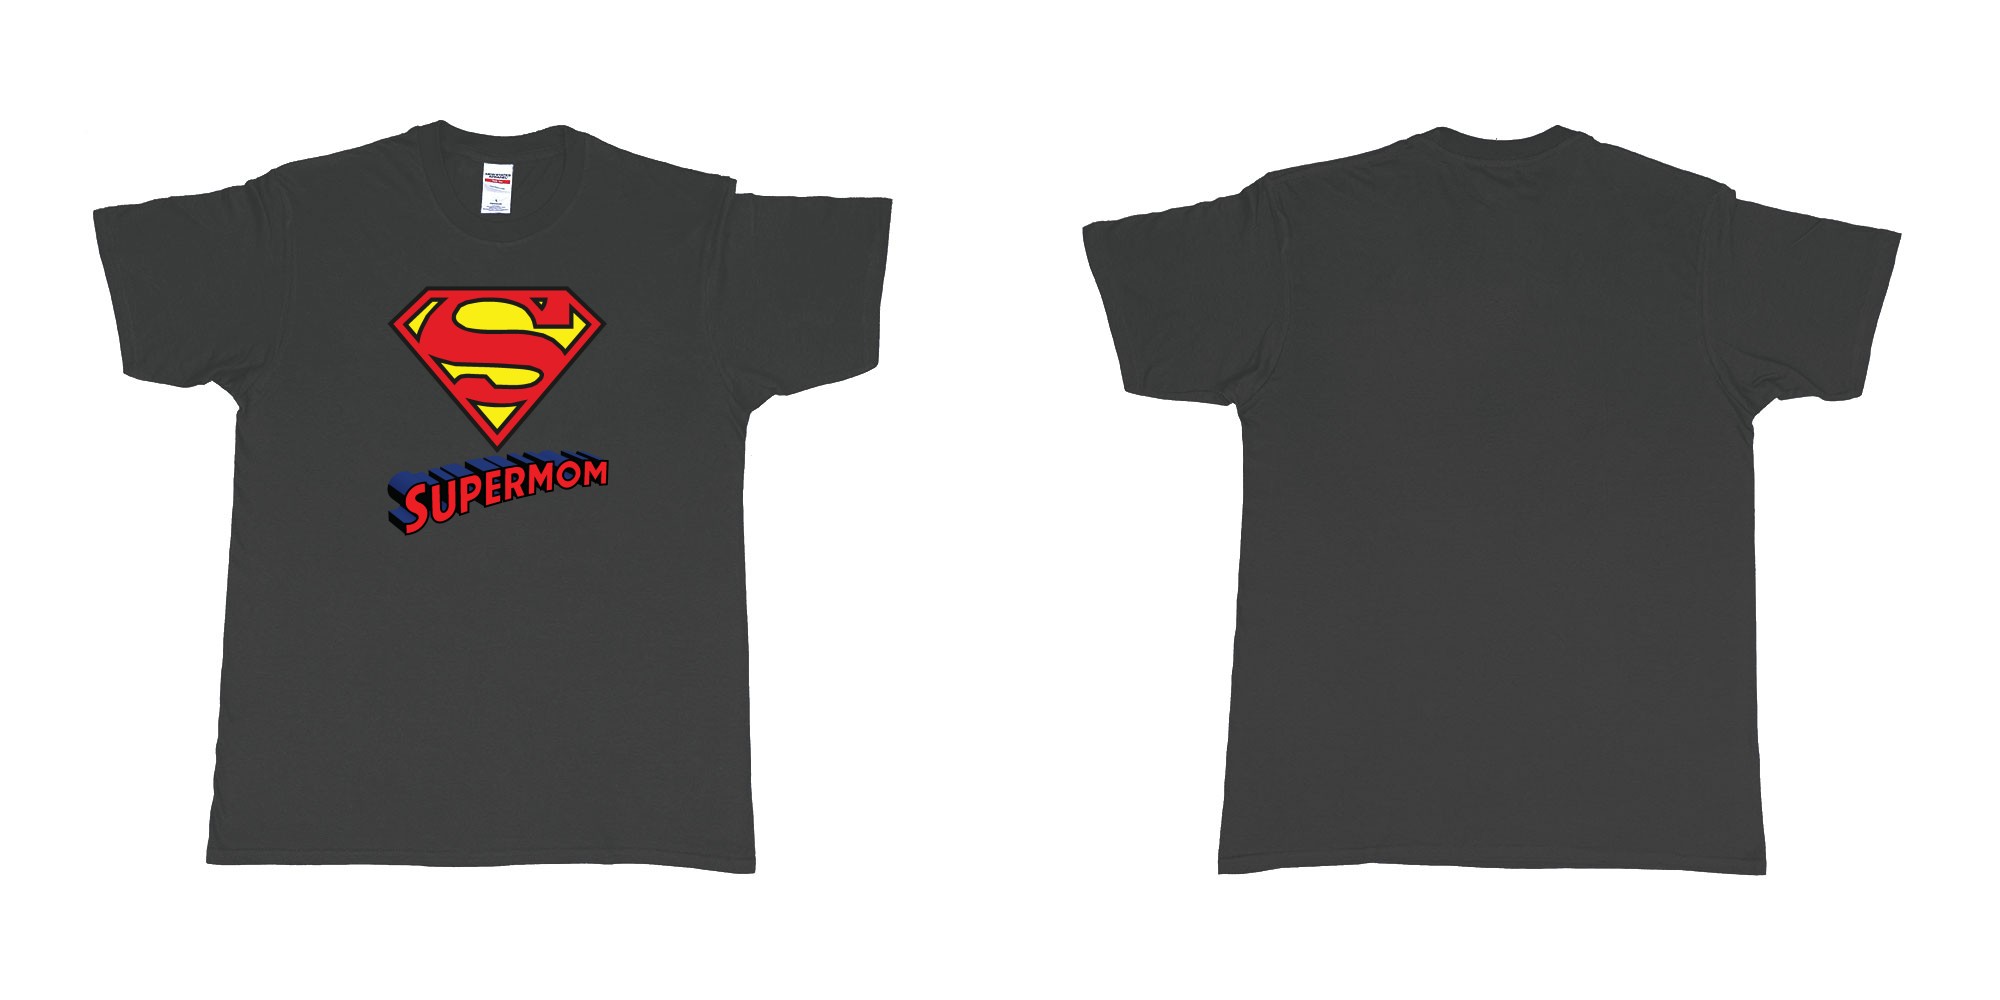 Custom tshirt design superman logo with own custom text print bali in fabric color black choice your own text made in Bali by The Pirate Way